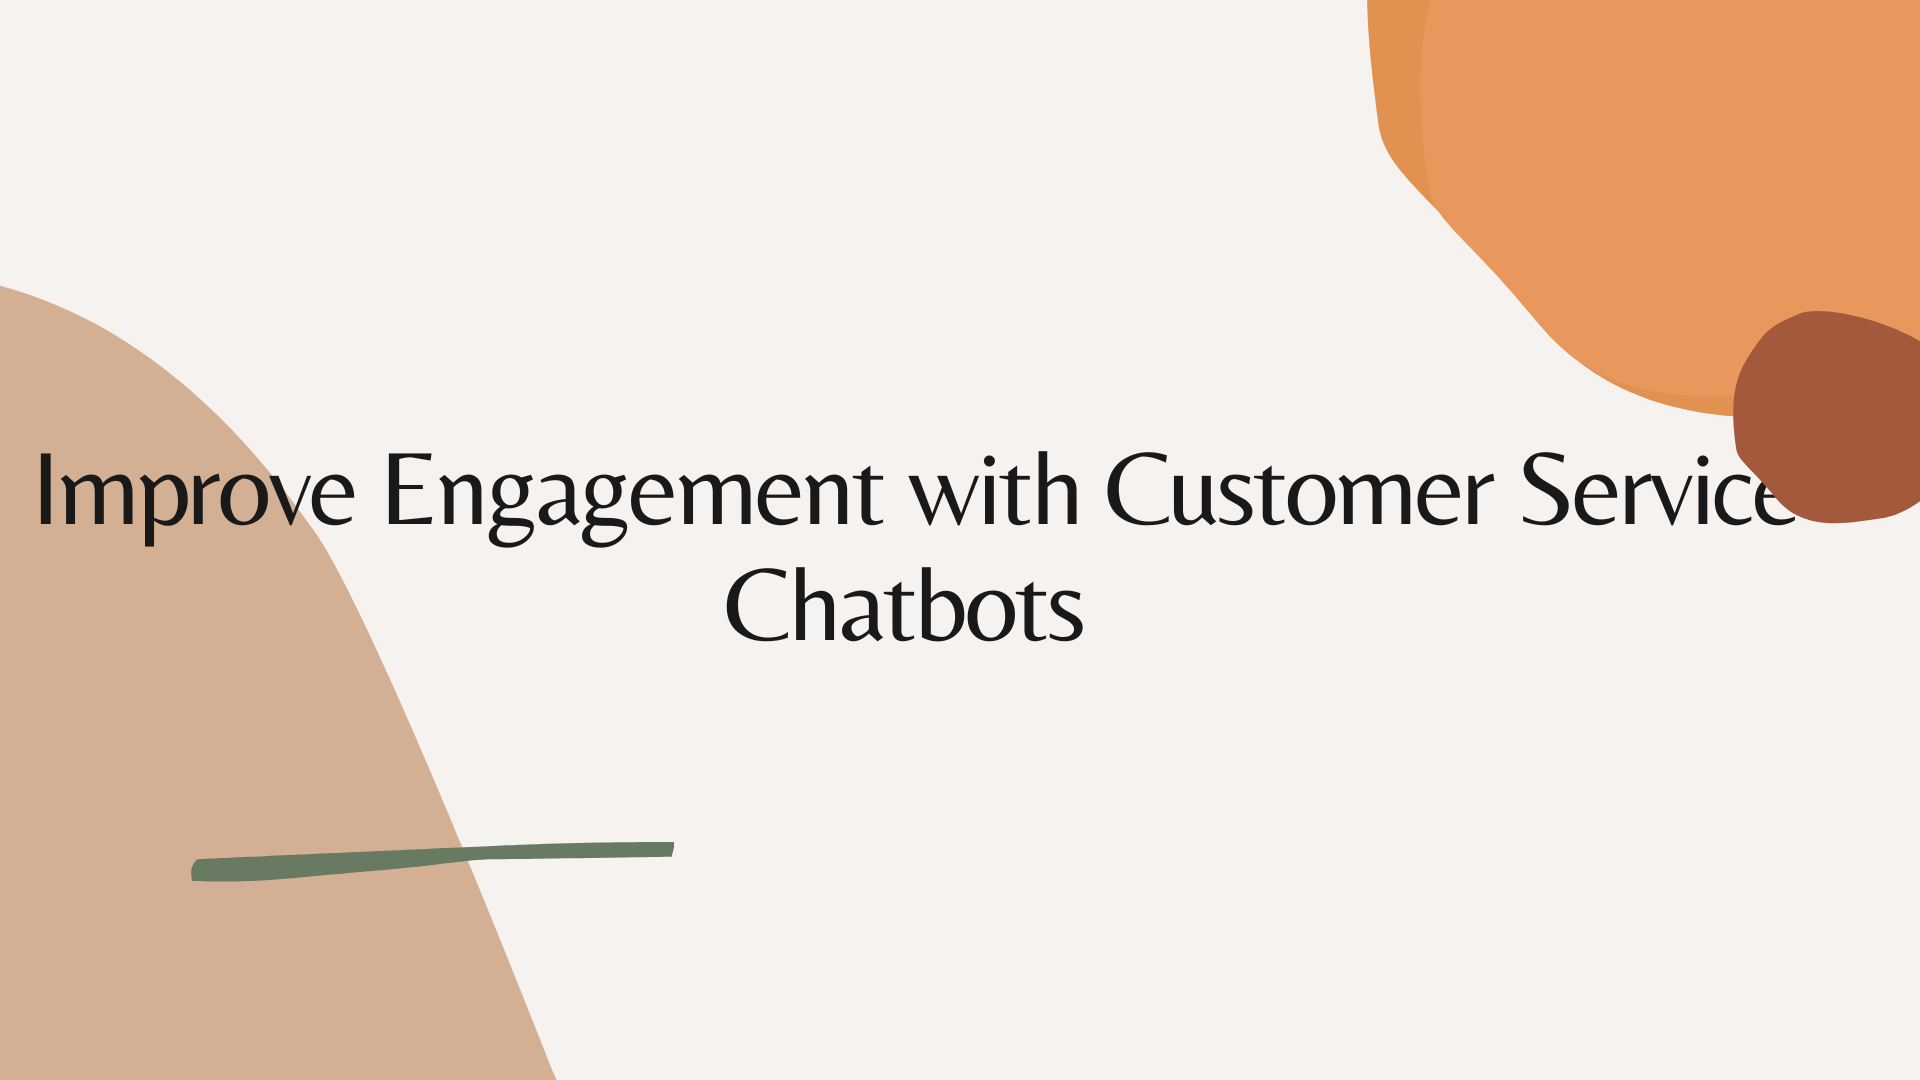 Improve Engagement with Customer Service Chatbots